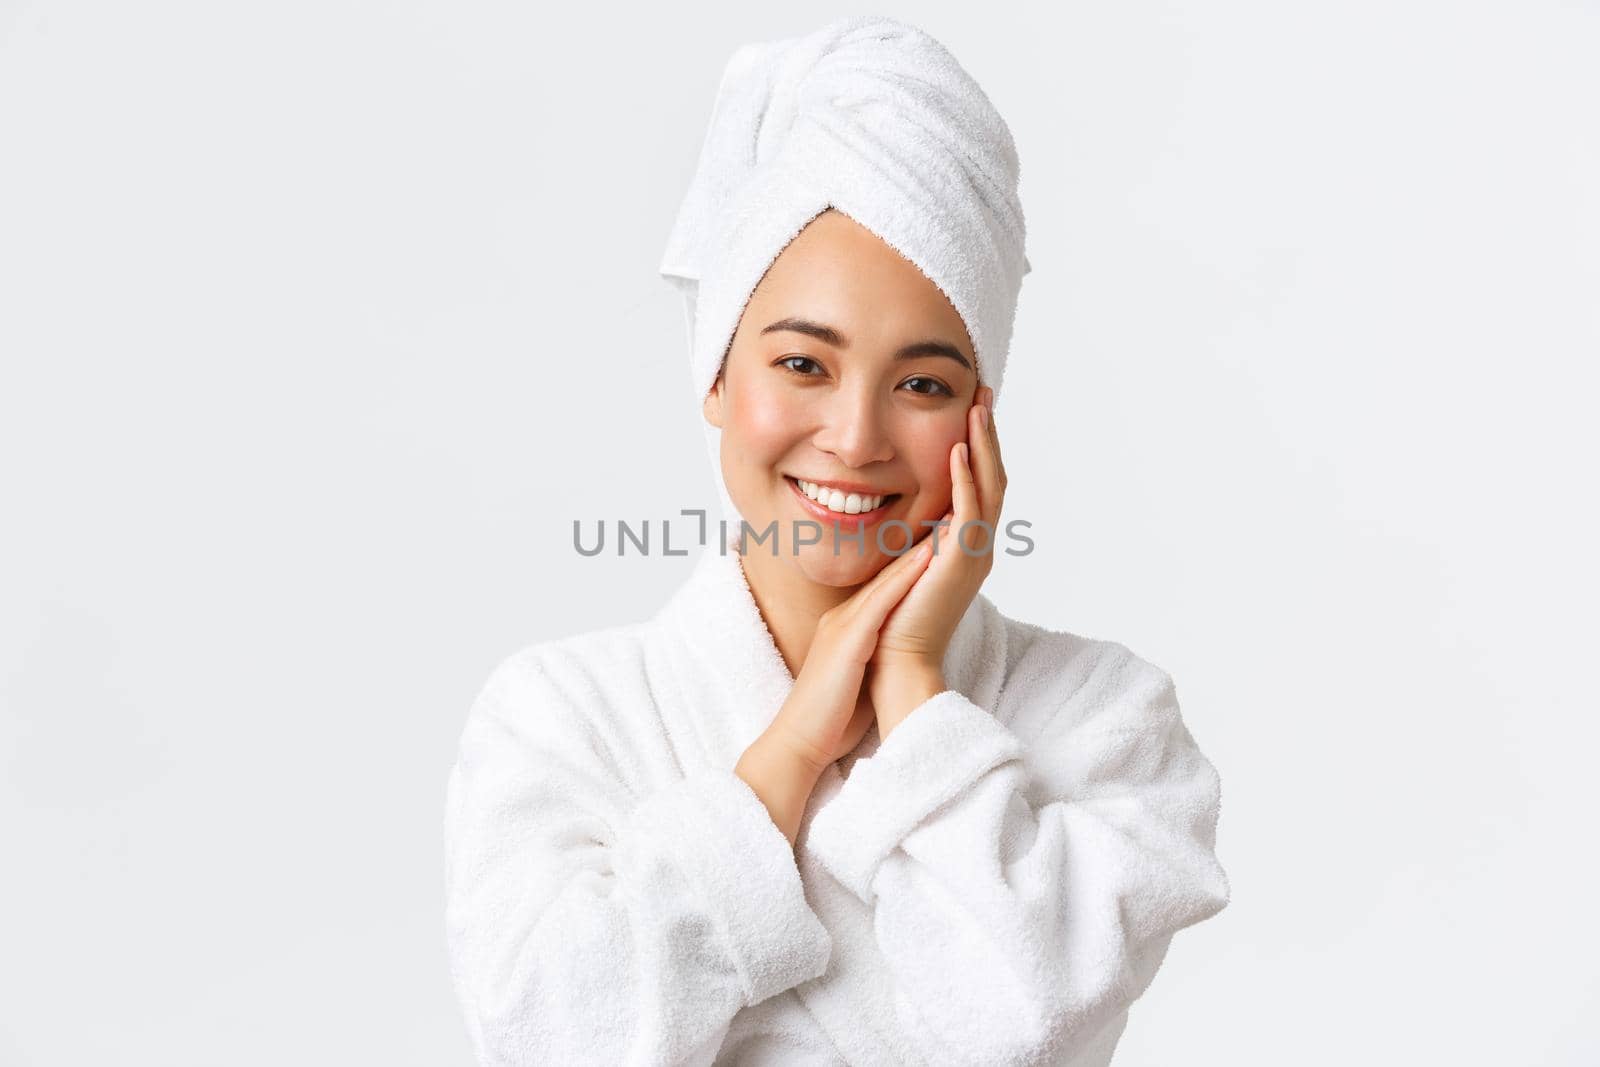 Personal care, women beauty, bath and shower concept. Close-up of beautiful happy asian woman in towel and bathrobe touching face gently, smiling white teeth, promo of skin care and hygiene products.